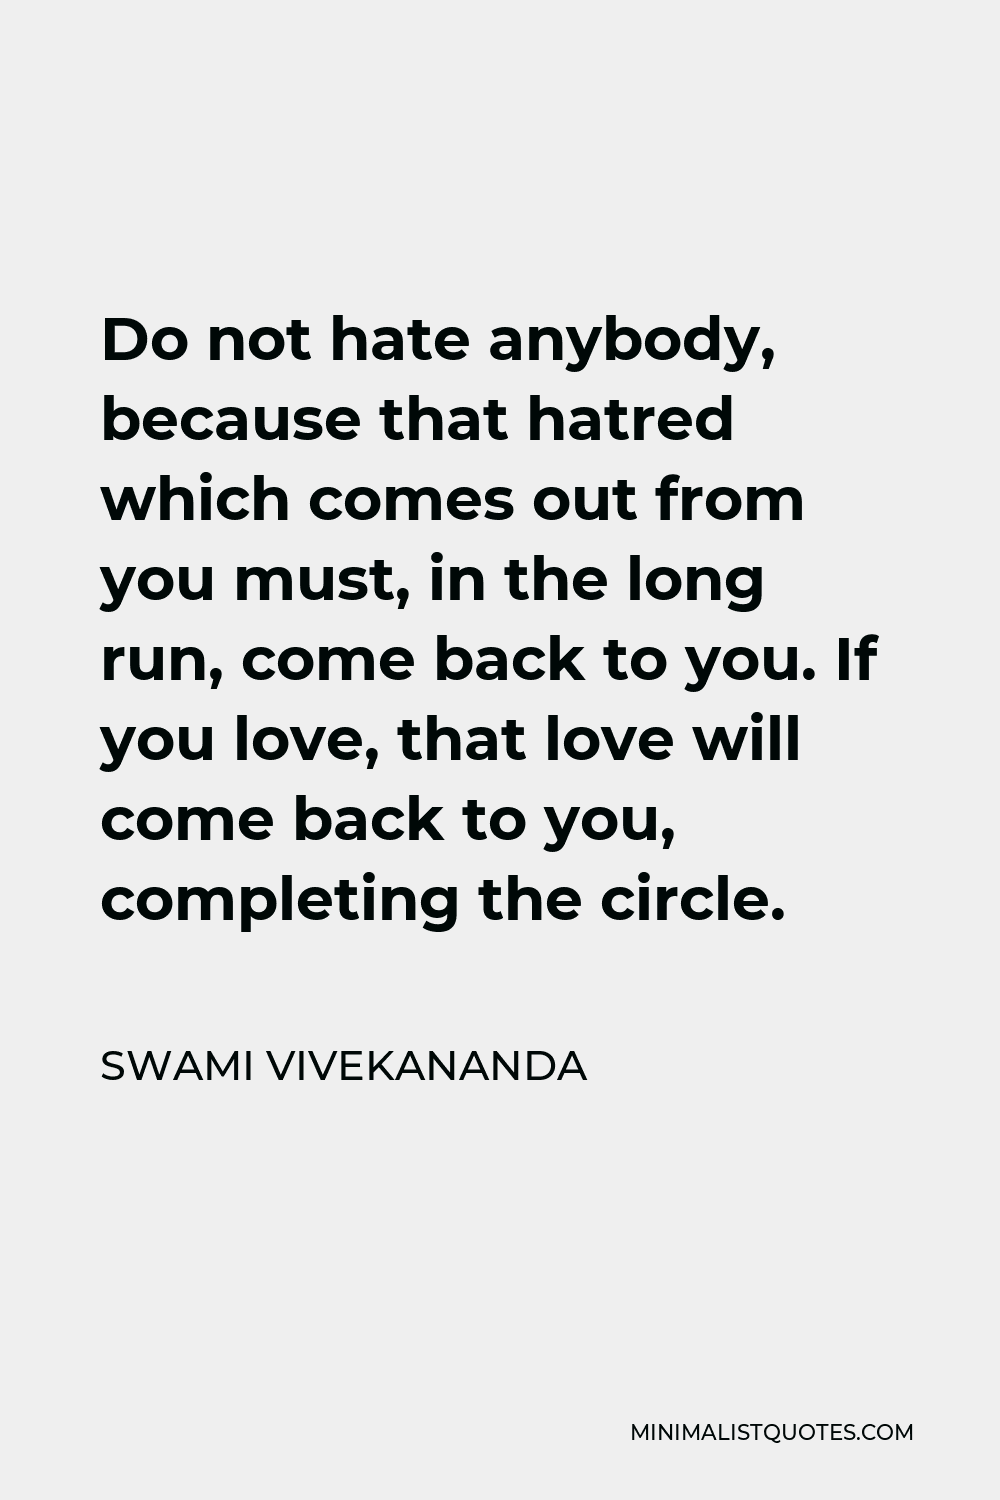 Swami Vivekananda Quote - Do not hate anybody, because that hatred which comes out from you must, in the long run, come back to you. If you love, that love will come back to you, completing the circle.